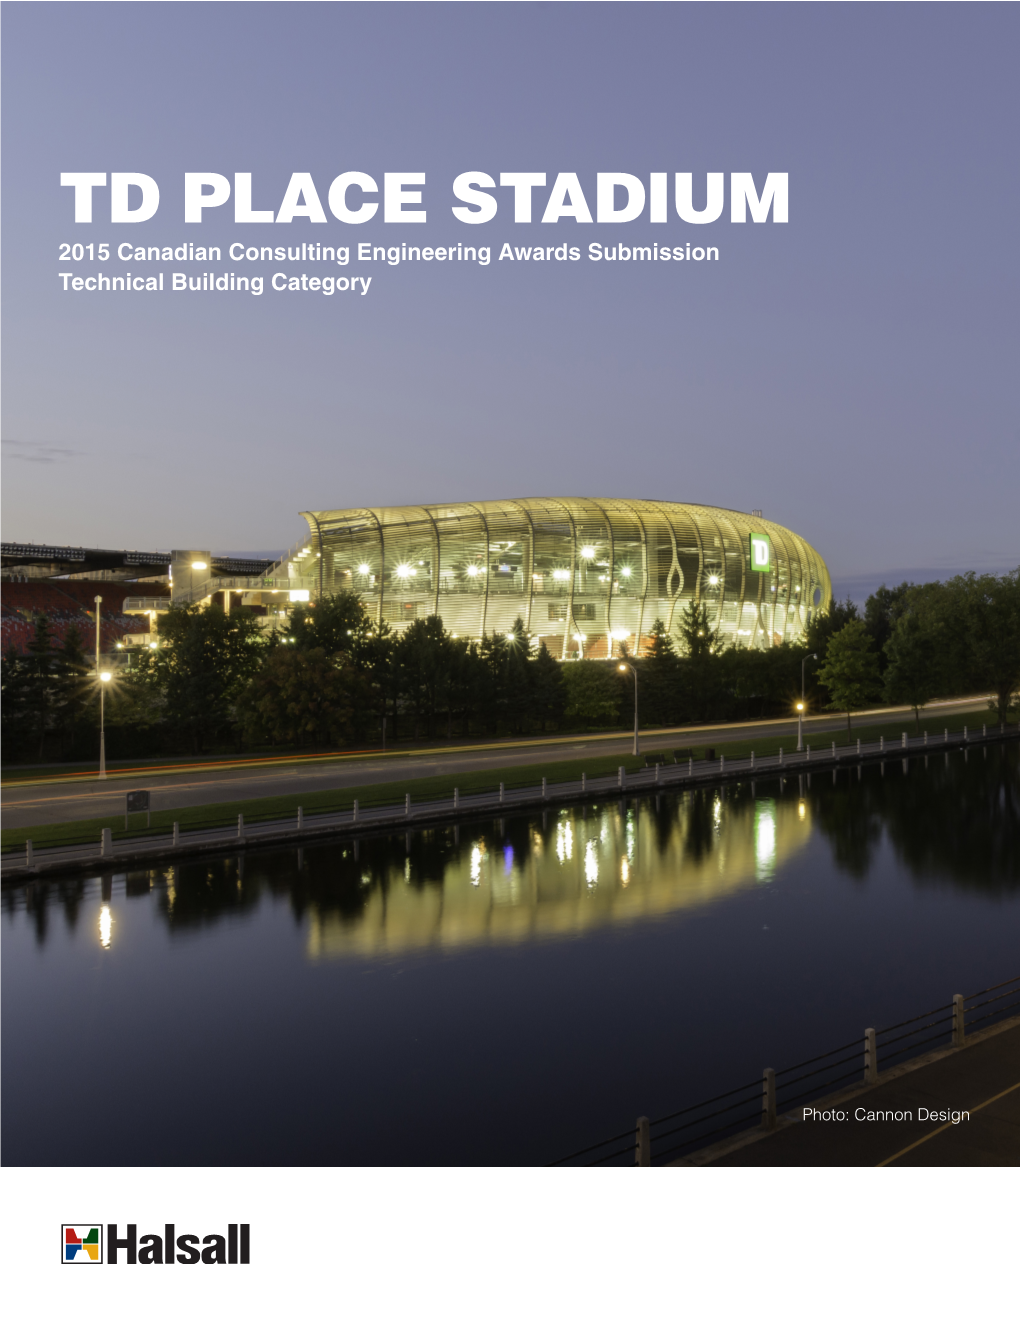 TD PLACE STADIUM 2015 Canadian Consulting Engineering Awards Submission Technical Building Category